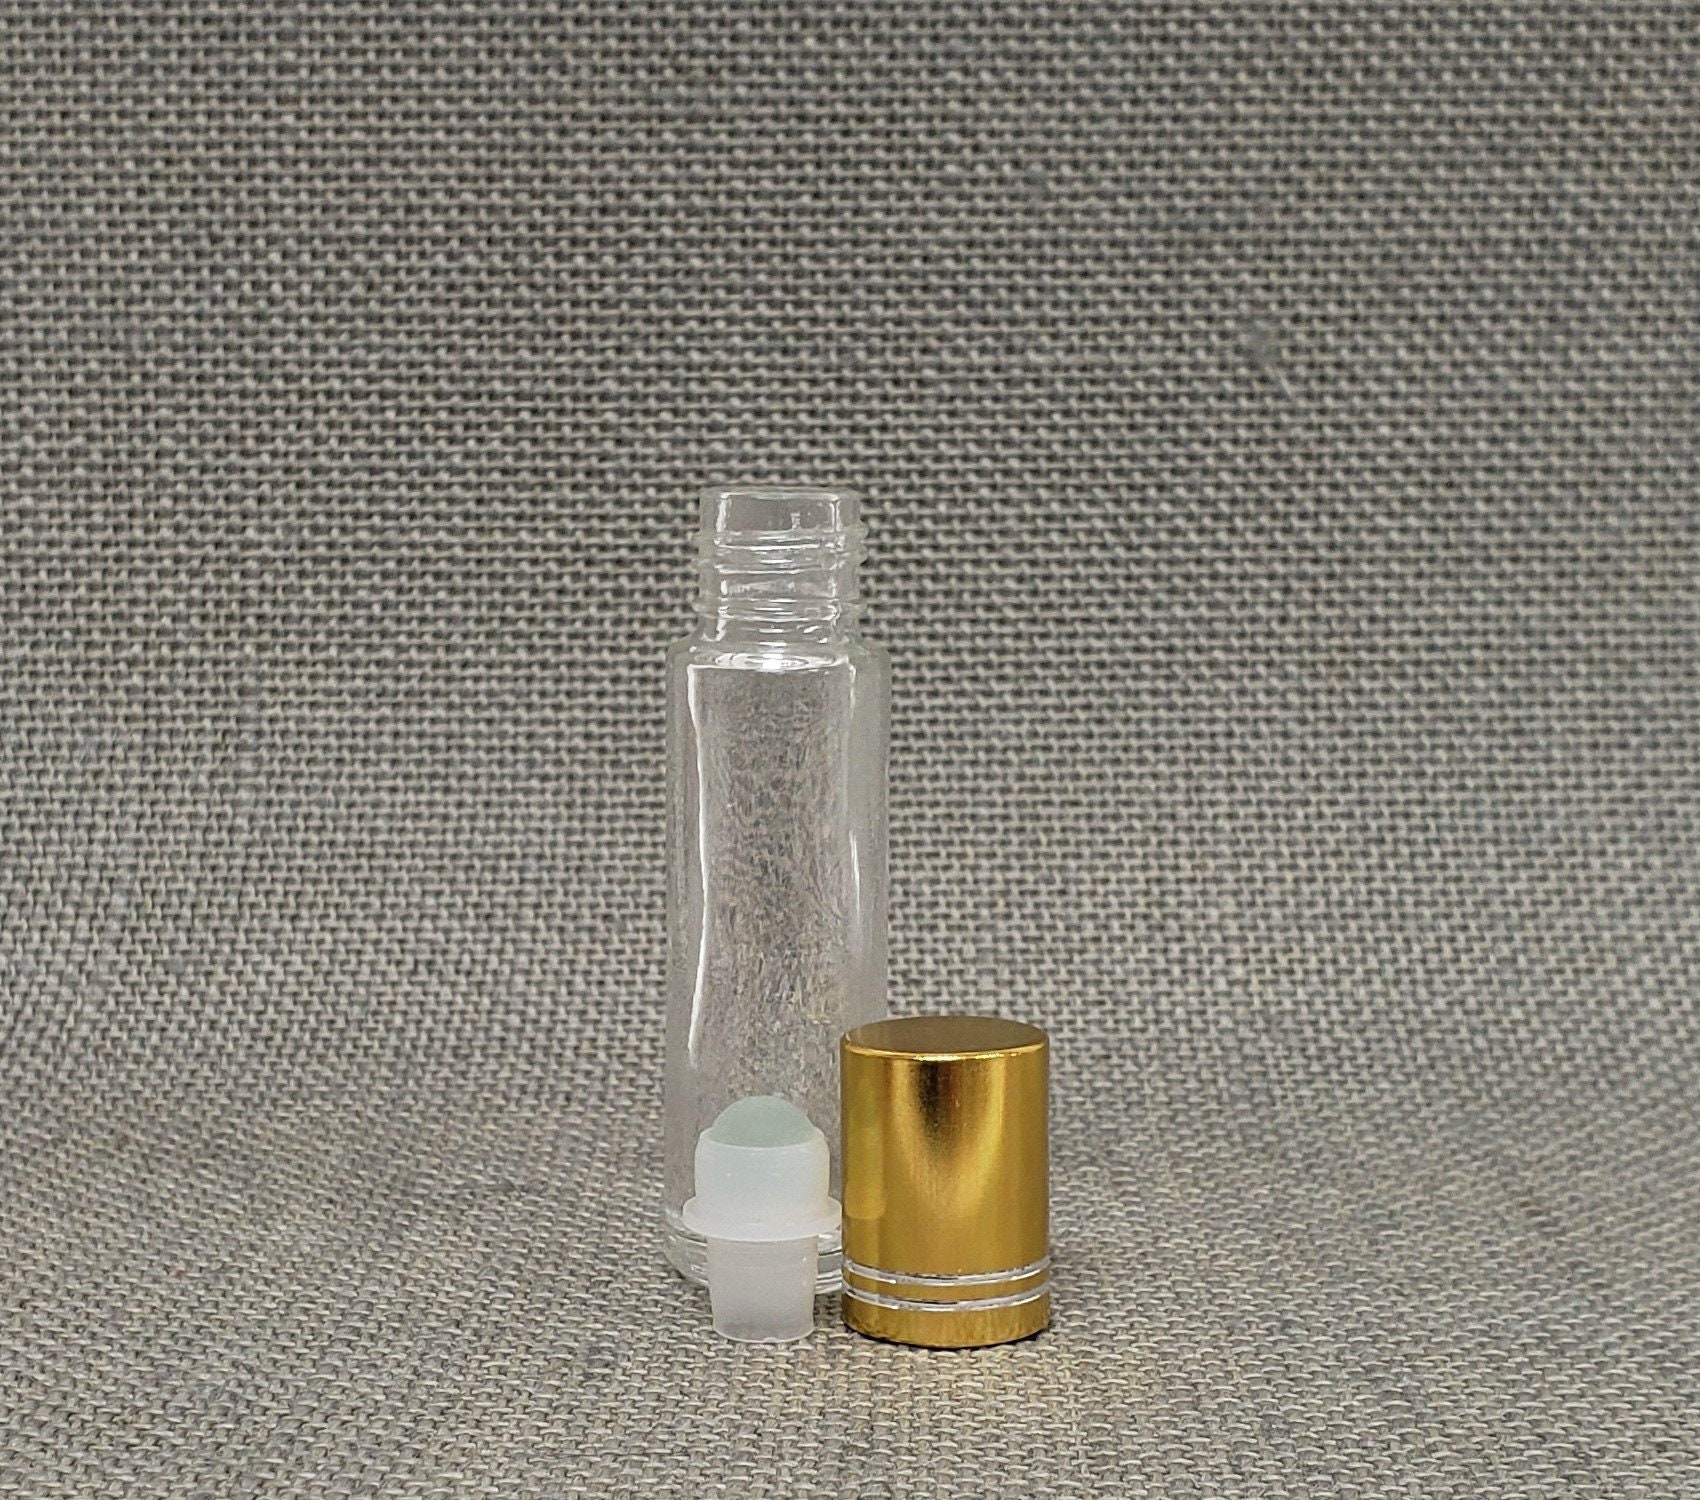 10ml Roller Bottle Set with Silver Caps for Essential Oil